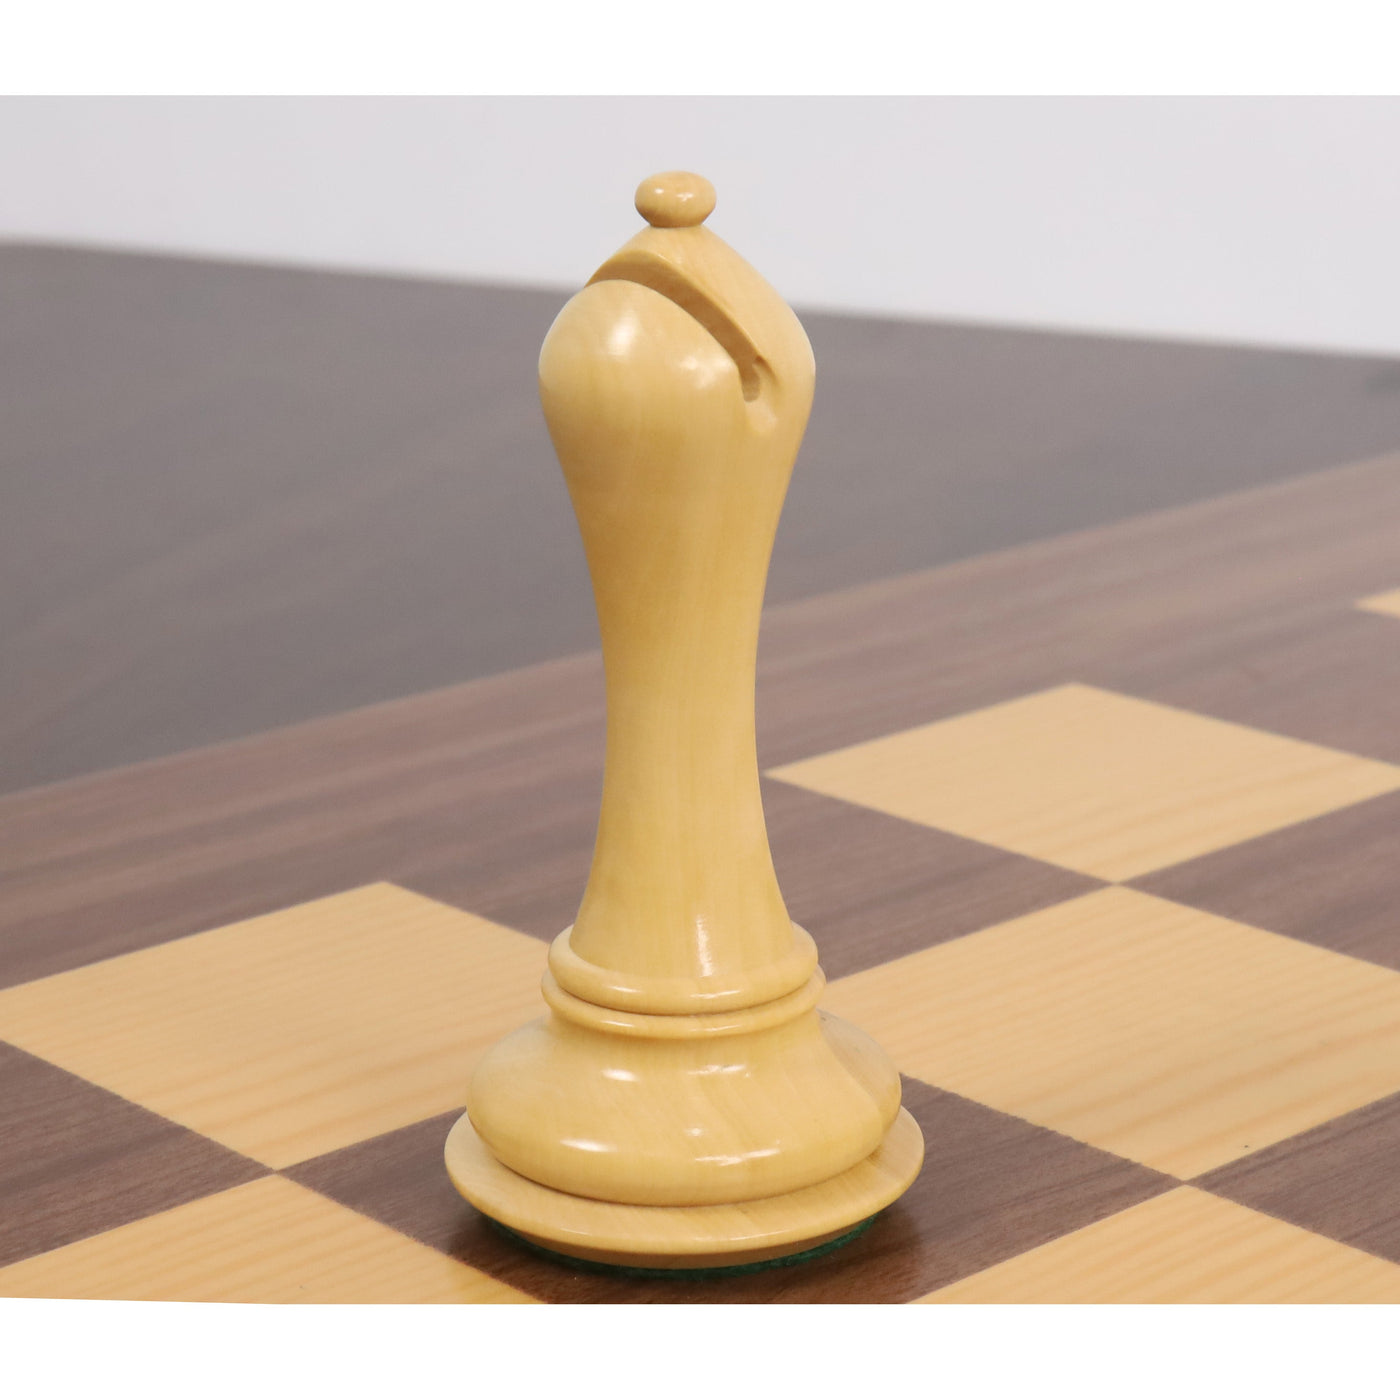 Slightly Imperfect 4.6" Avant Garde Luxury Staunton Chess Set - Chess Pieces Only - Bud Rosewood & Boxwood